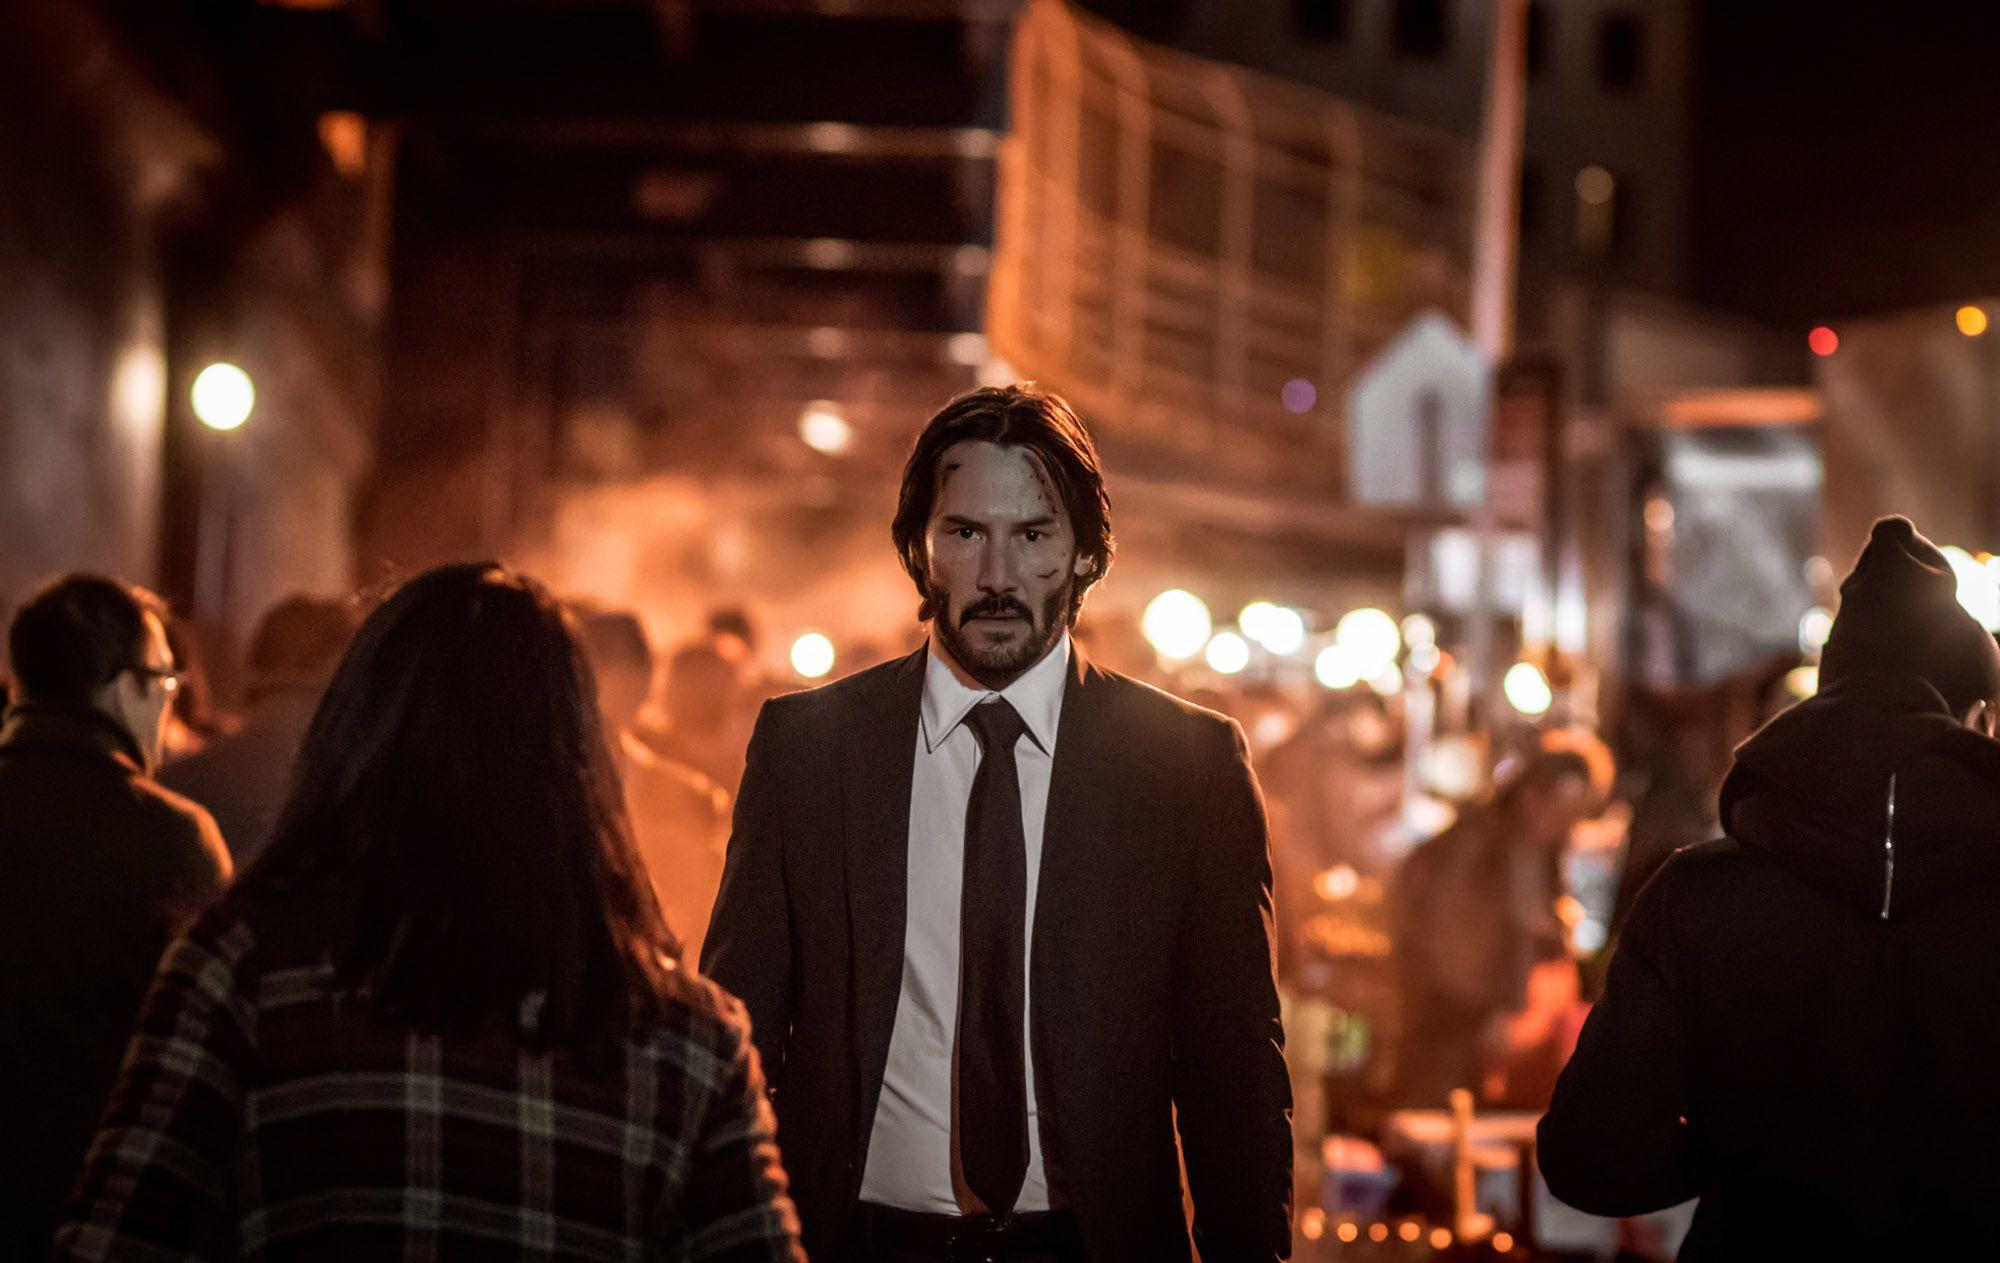 John Wick 3: First Synopsis and Promo Poster Revealed